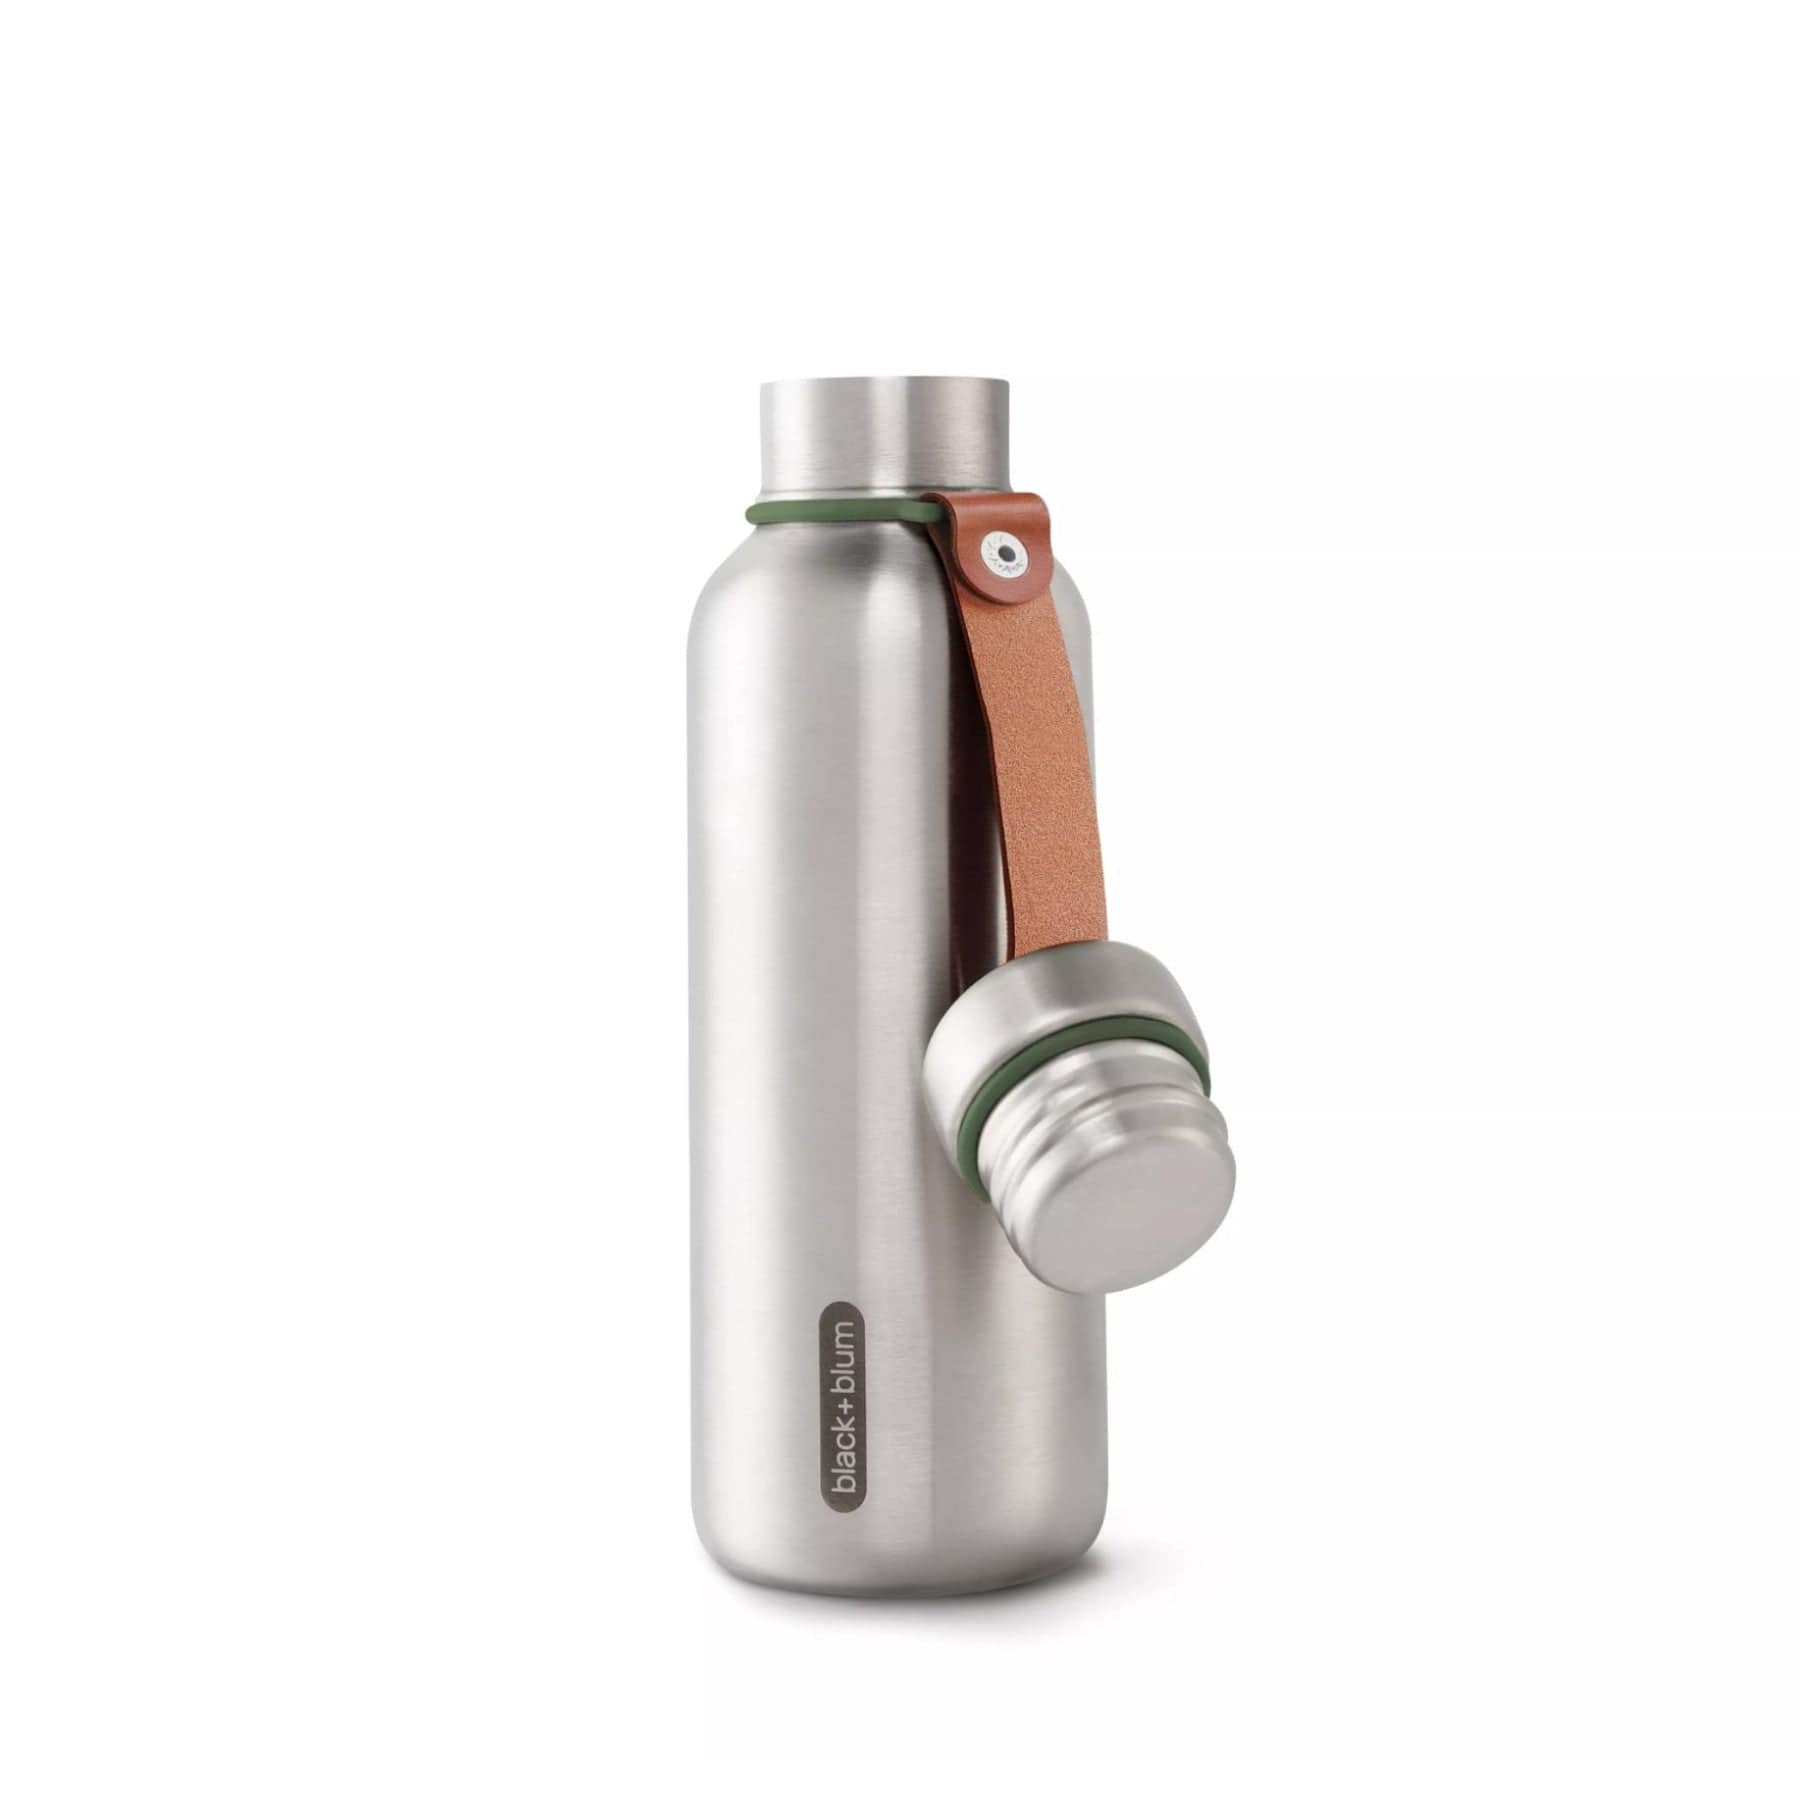 Stainless steel water bottle with leather strap, insulated, reusable and eco-friendly drinkware on a white background